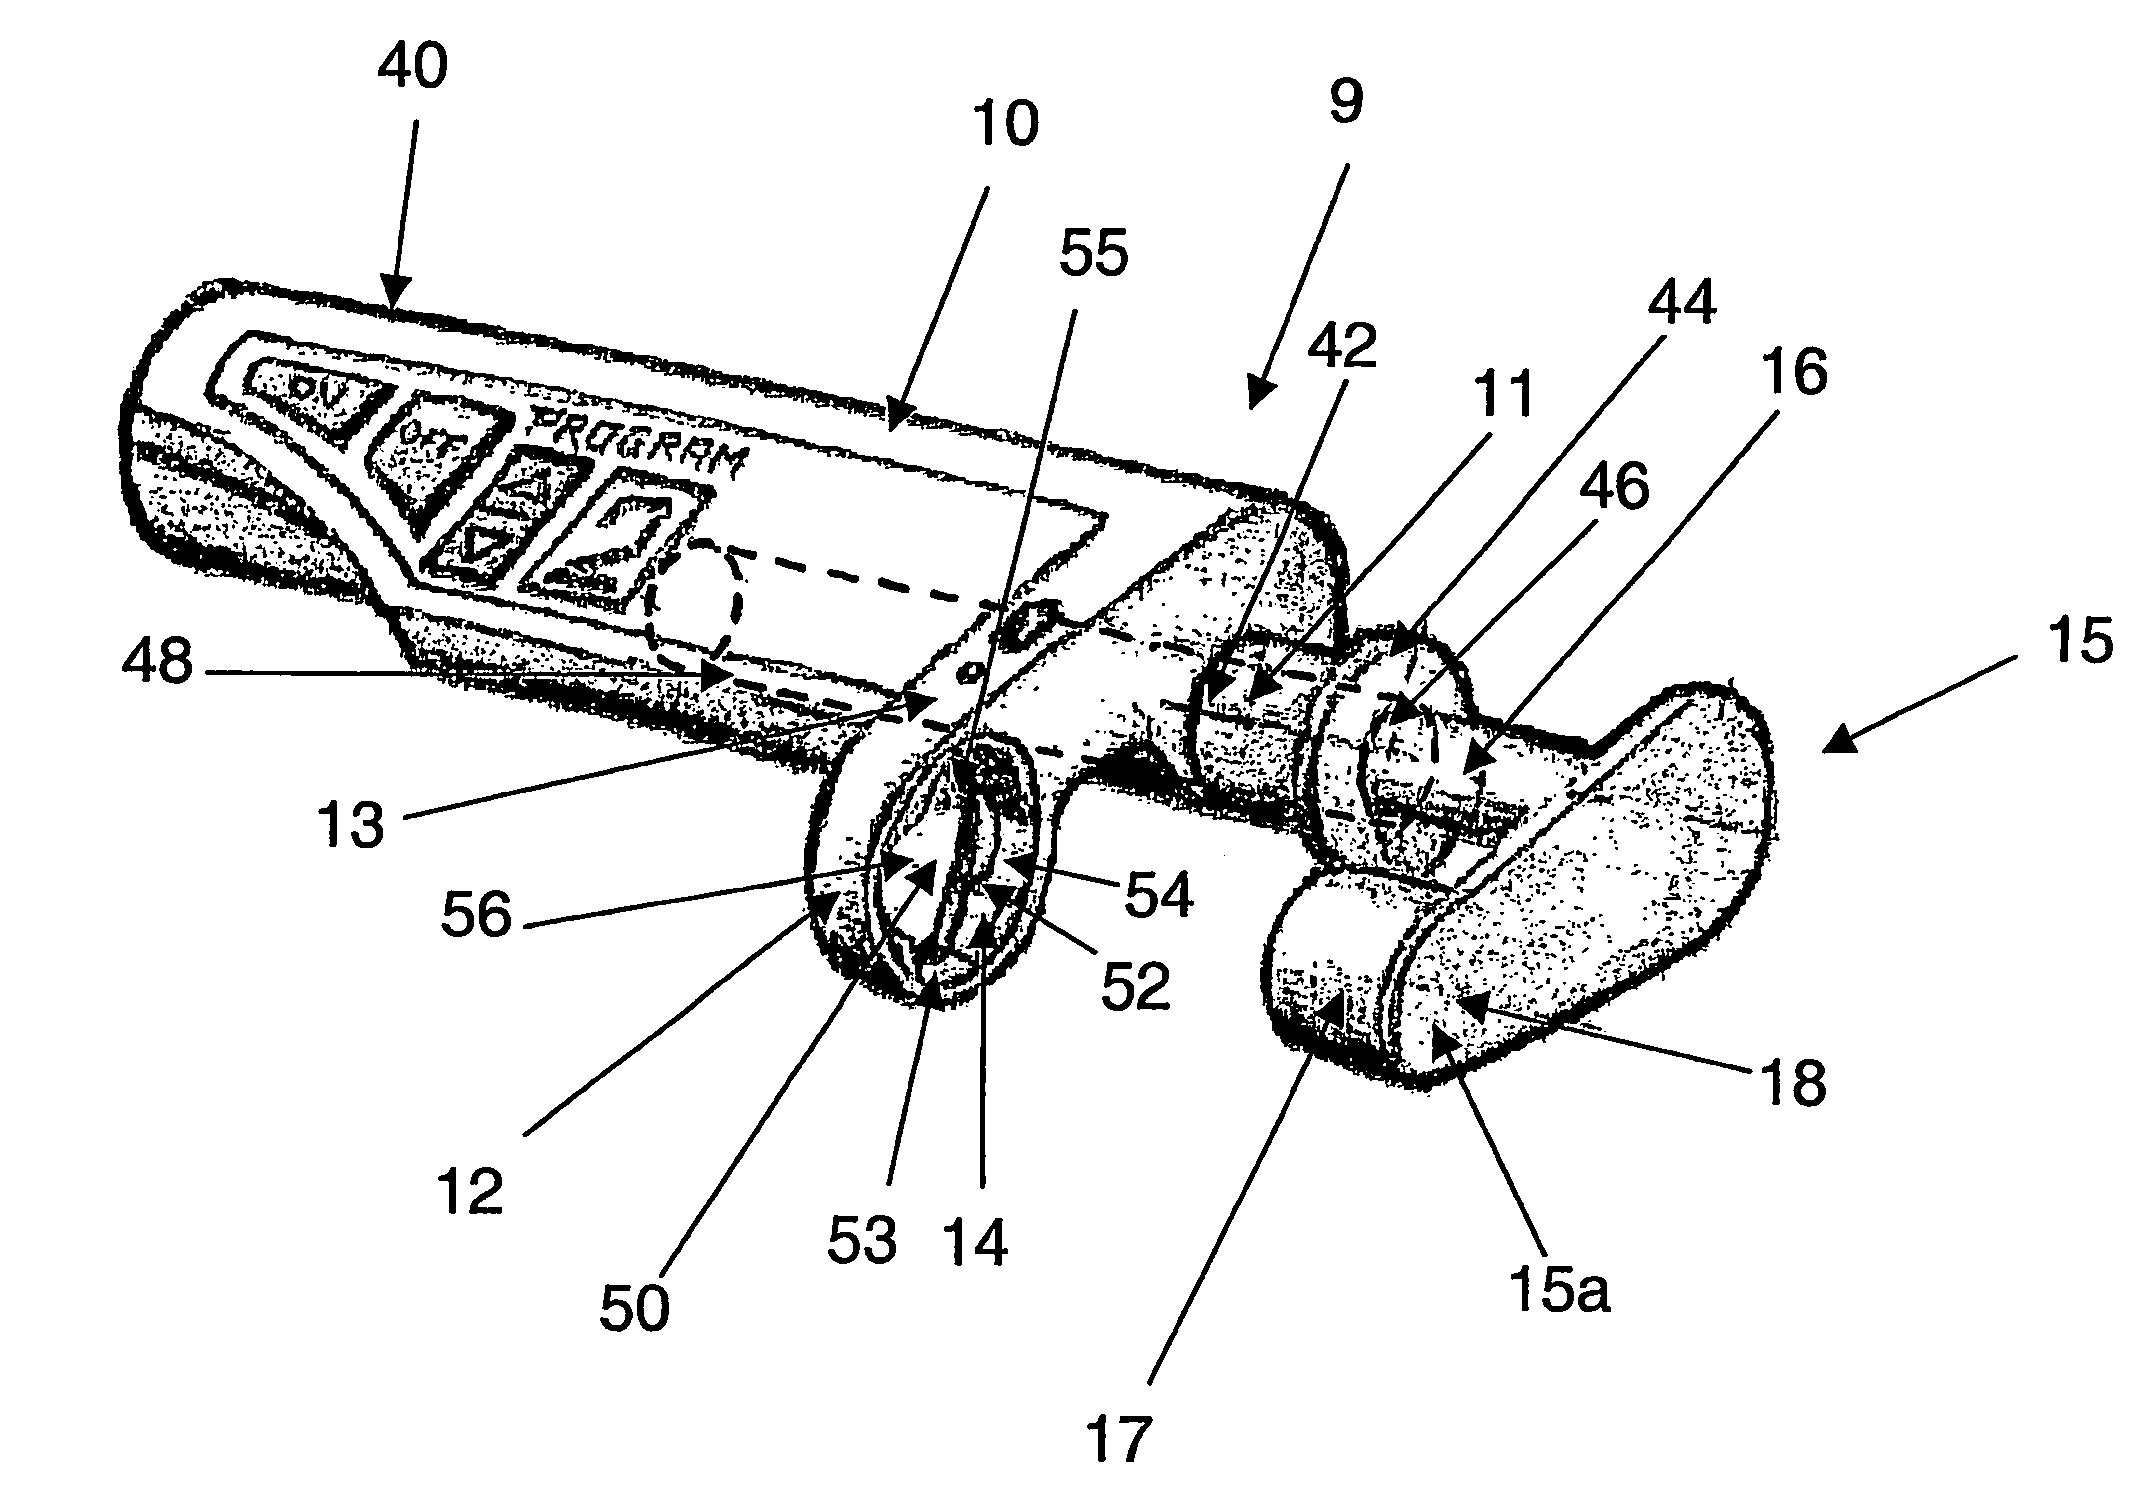 Syringe adapter with a driver for agitation of the syringe content